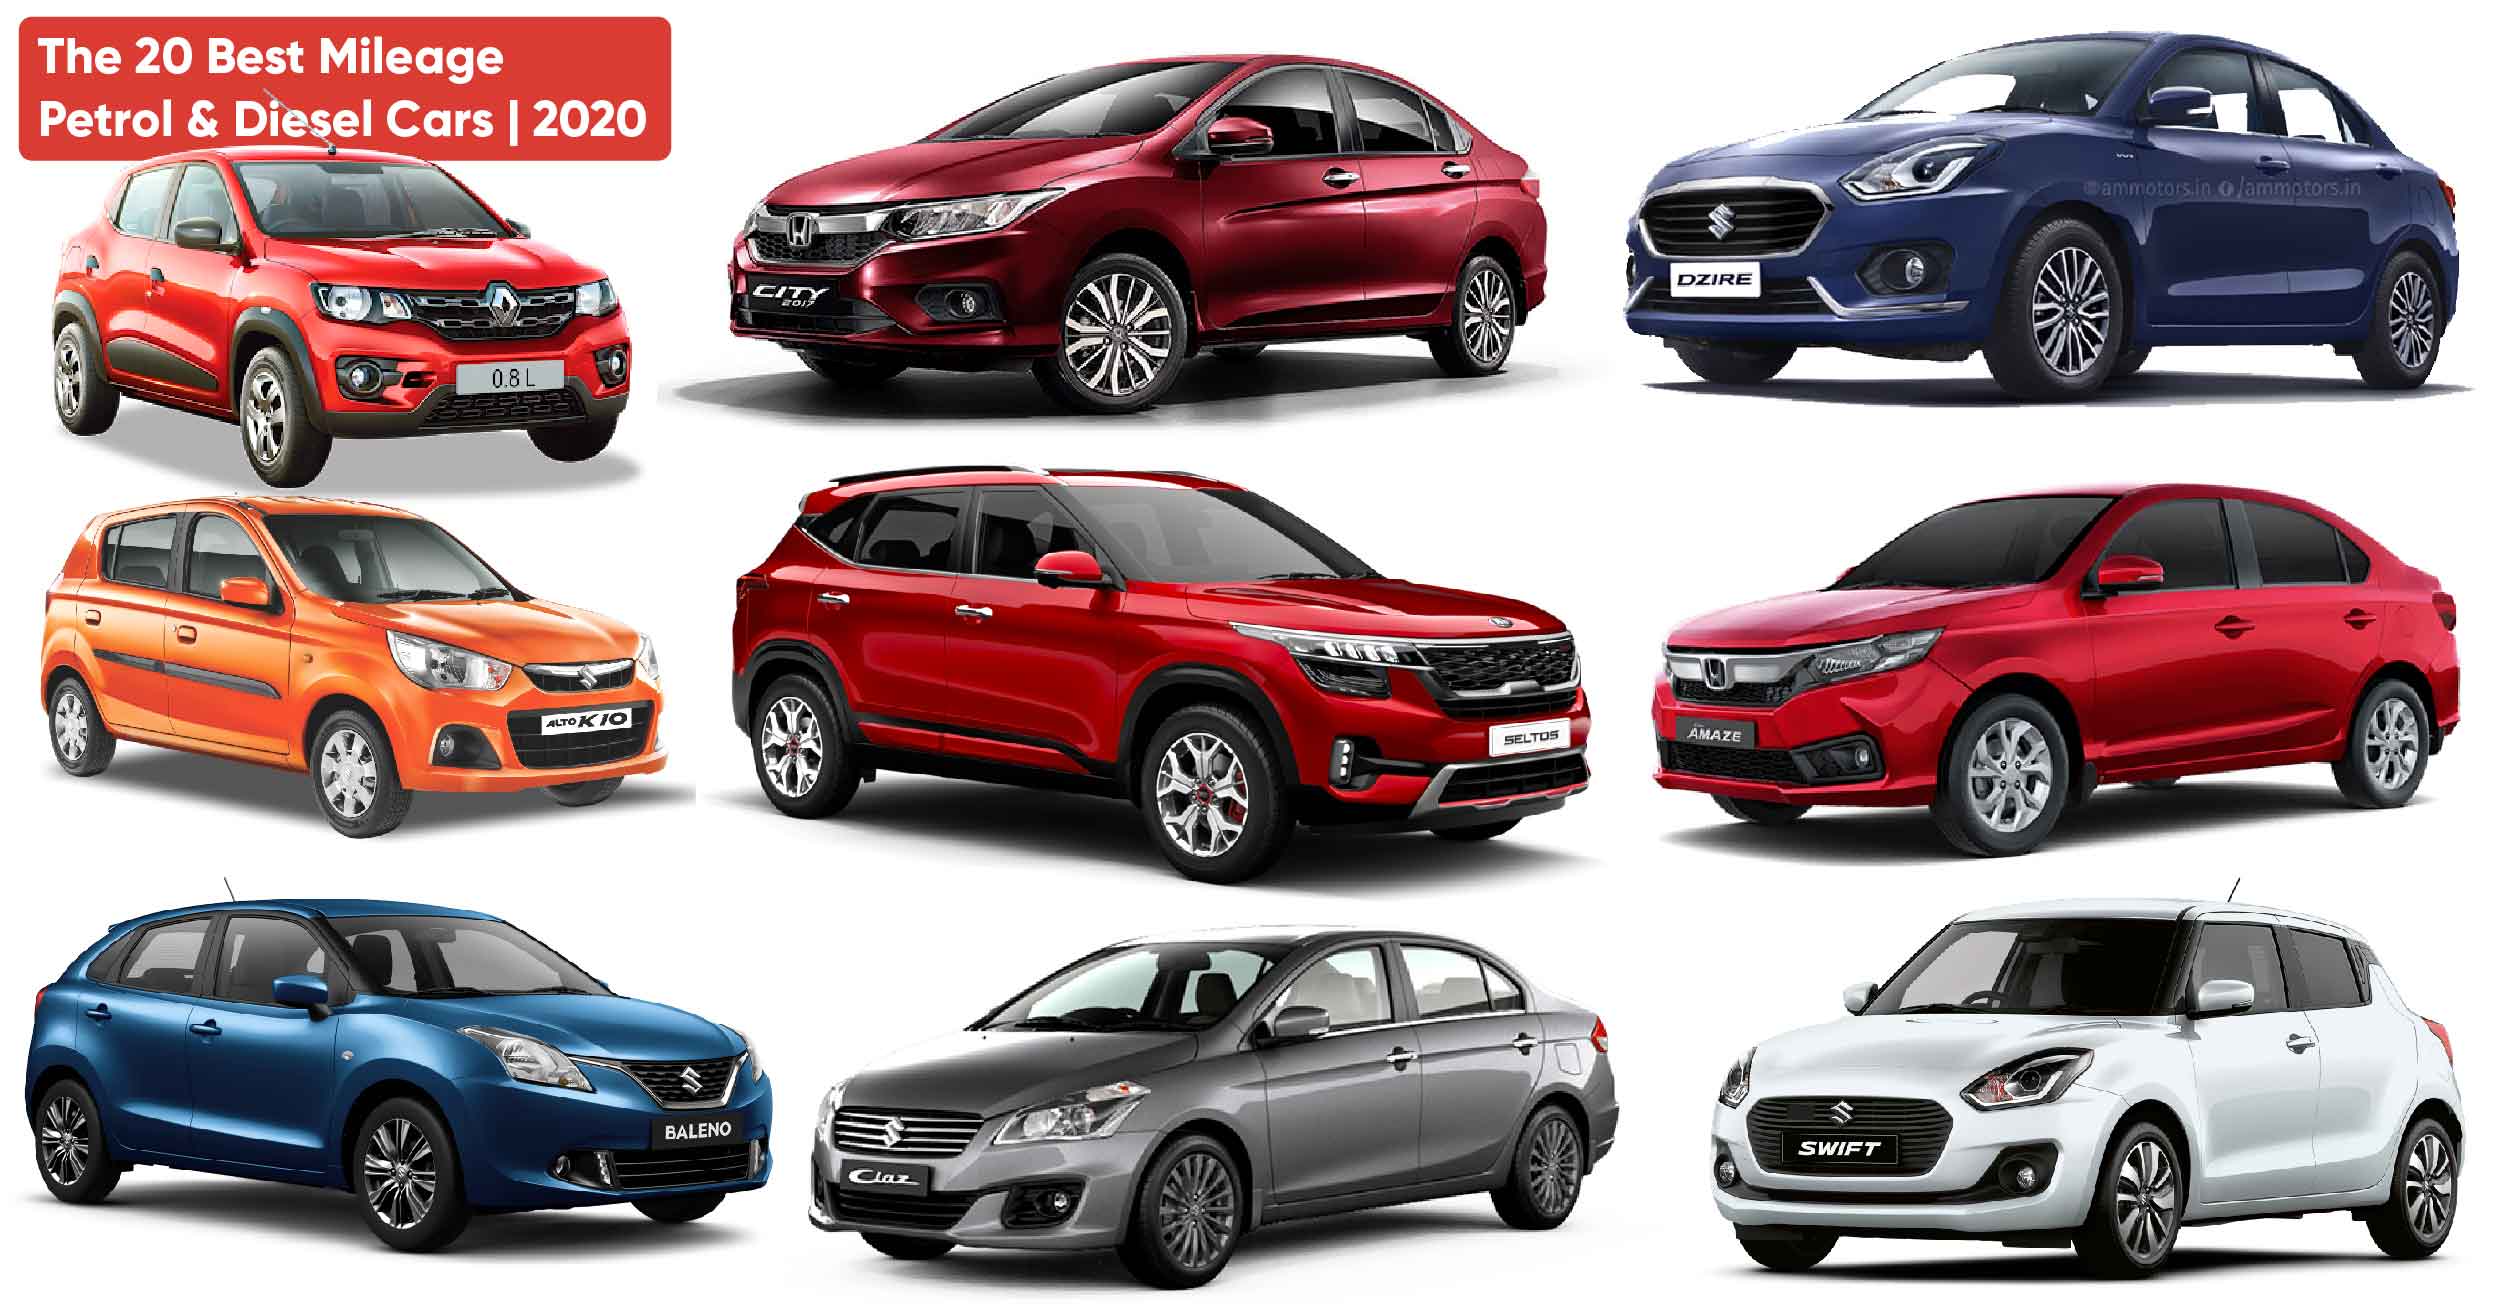 The 20 Best Mileage Cars (Fuel Efficient Cars) of 2020 Petrol and Diesel